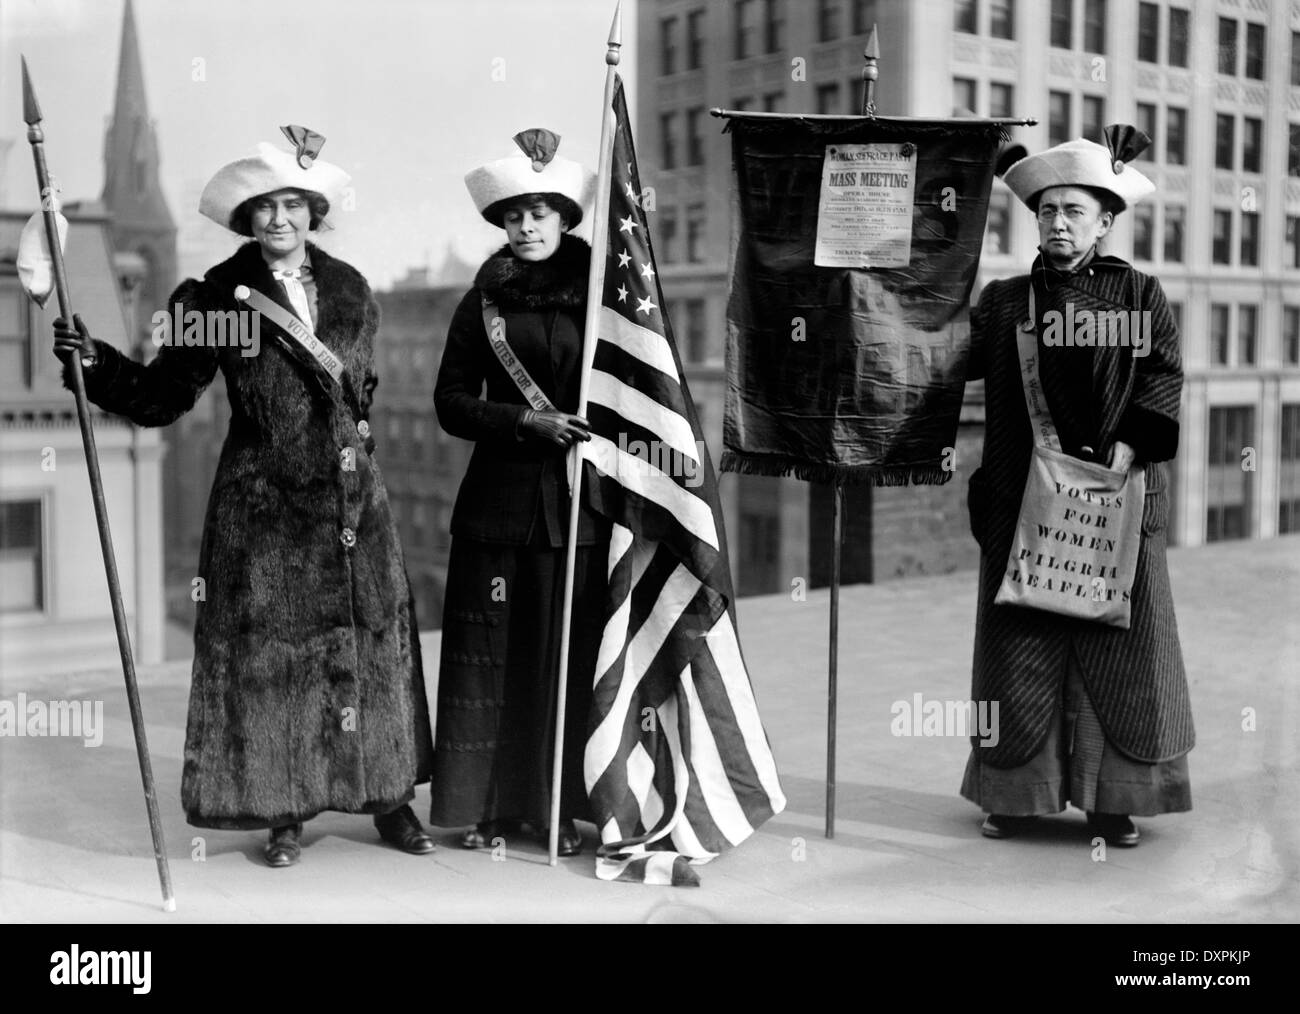 AMERICAN SUFFRAGISTS DEMONSTRATING about 1912 Stock Photo